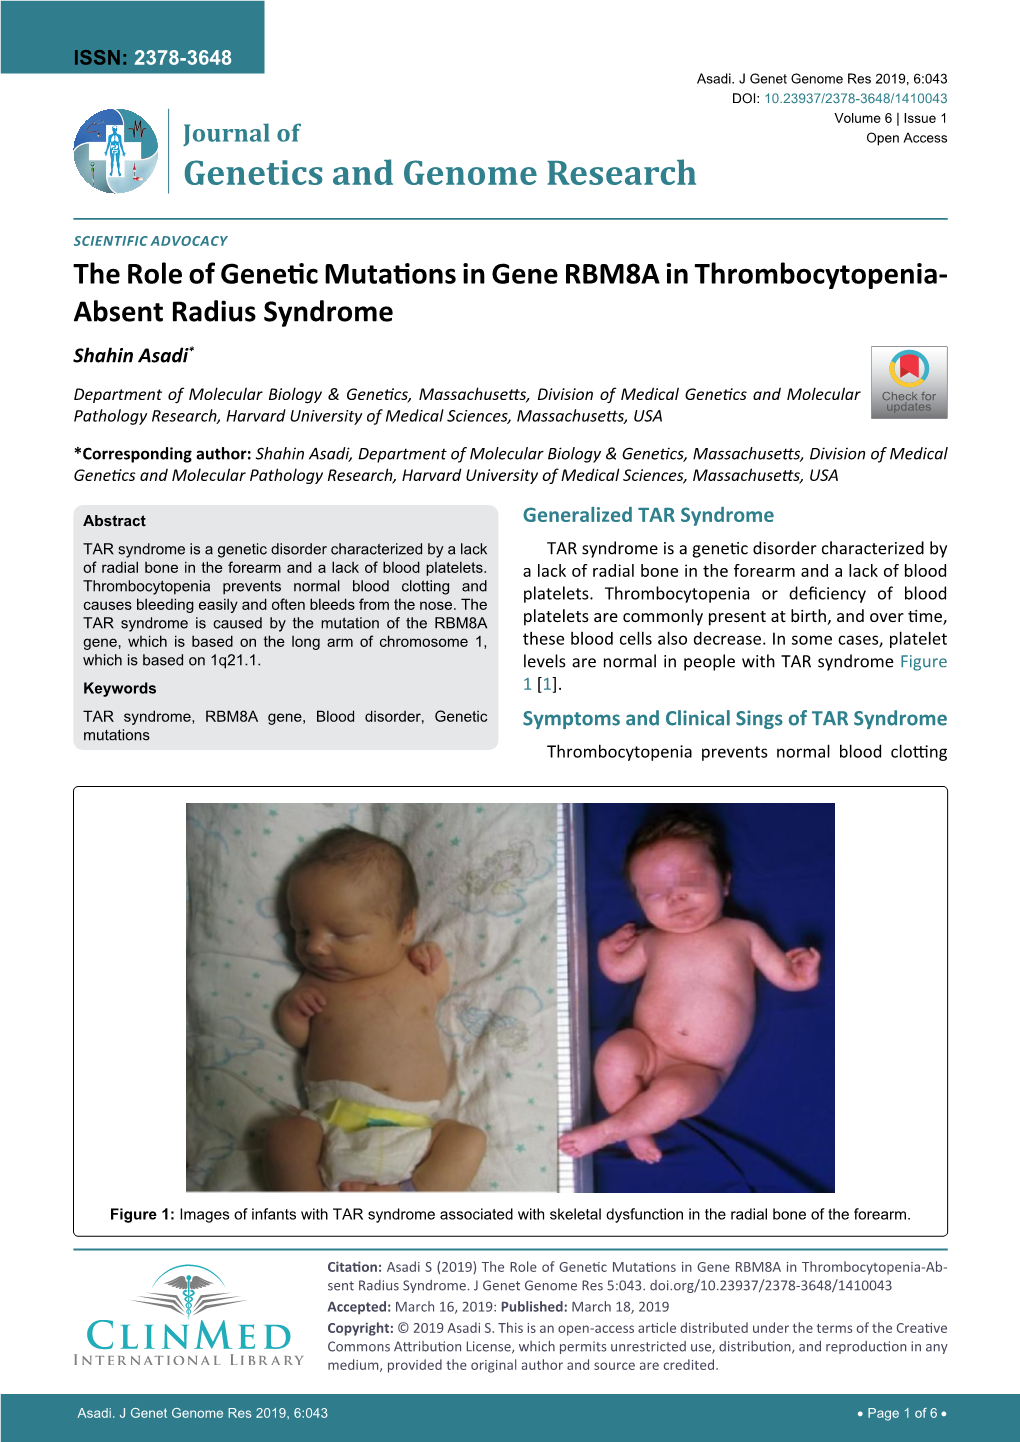 The Role of Genetic Mutations in Gene RBM8A in Thrombocytopenia- Absent Radius Syndrome Shahin Asadi*